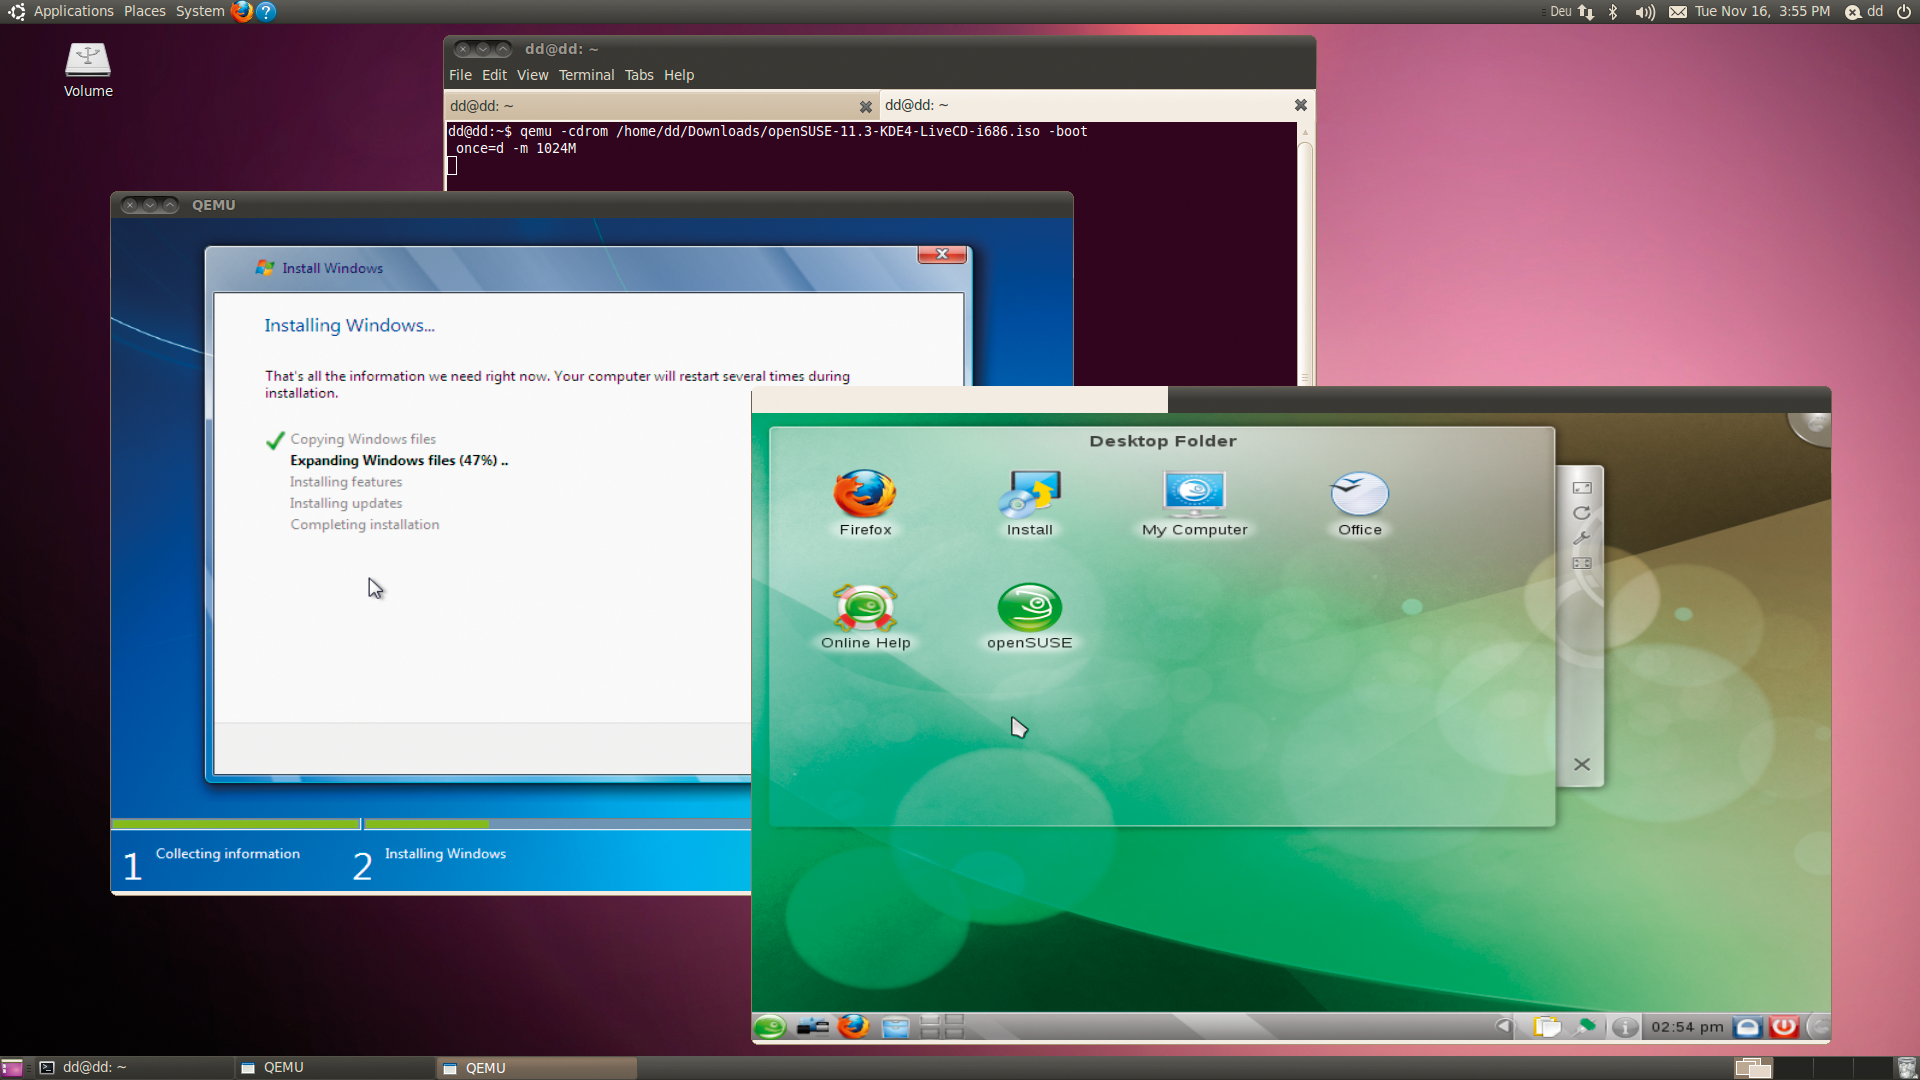 Thanks to KVM, Windows 7 and openSUSE 11.3 will run peacefully side by side on Ubuntu 10.04 . 